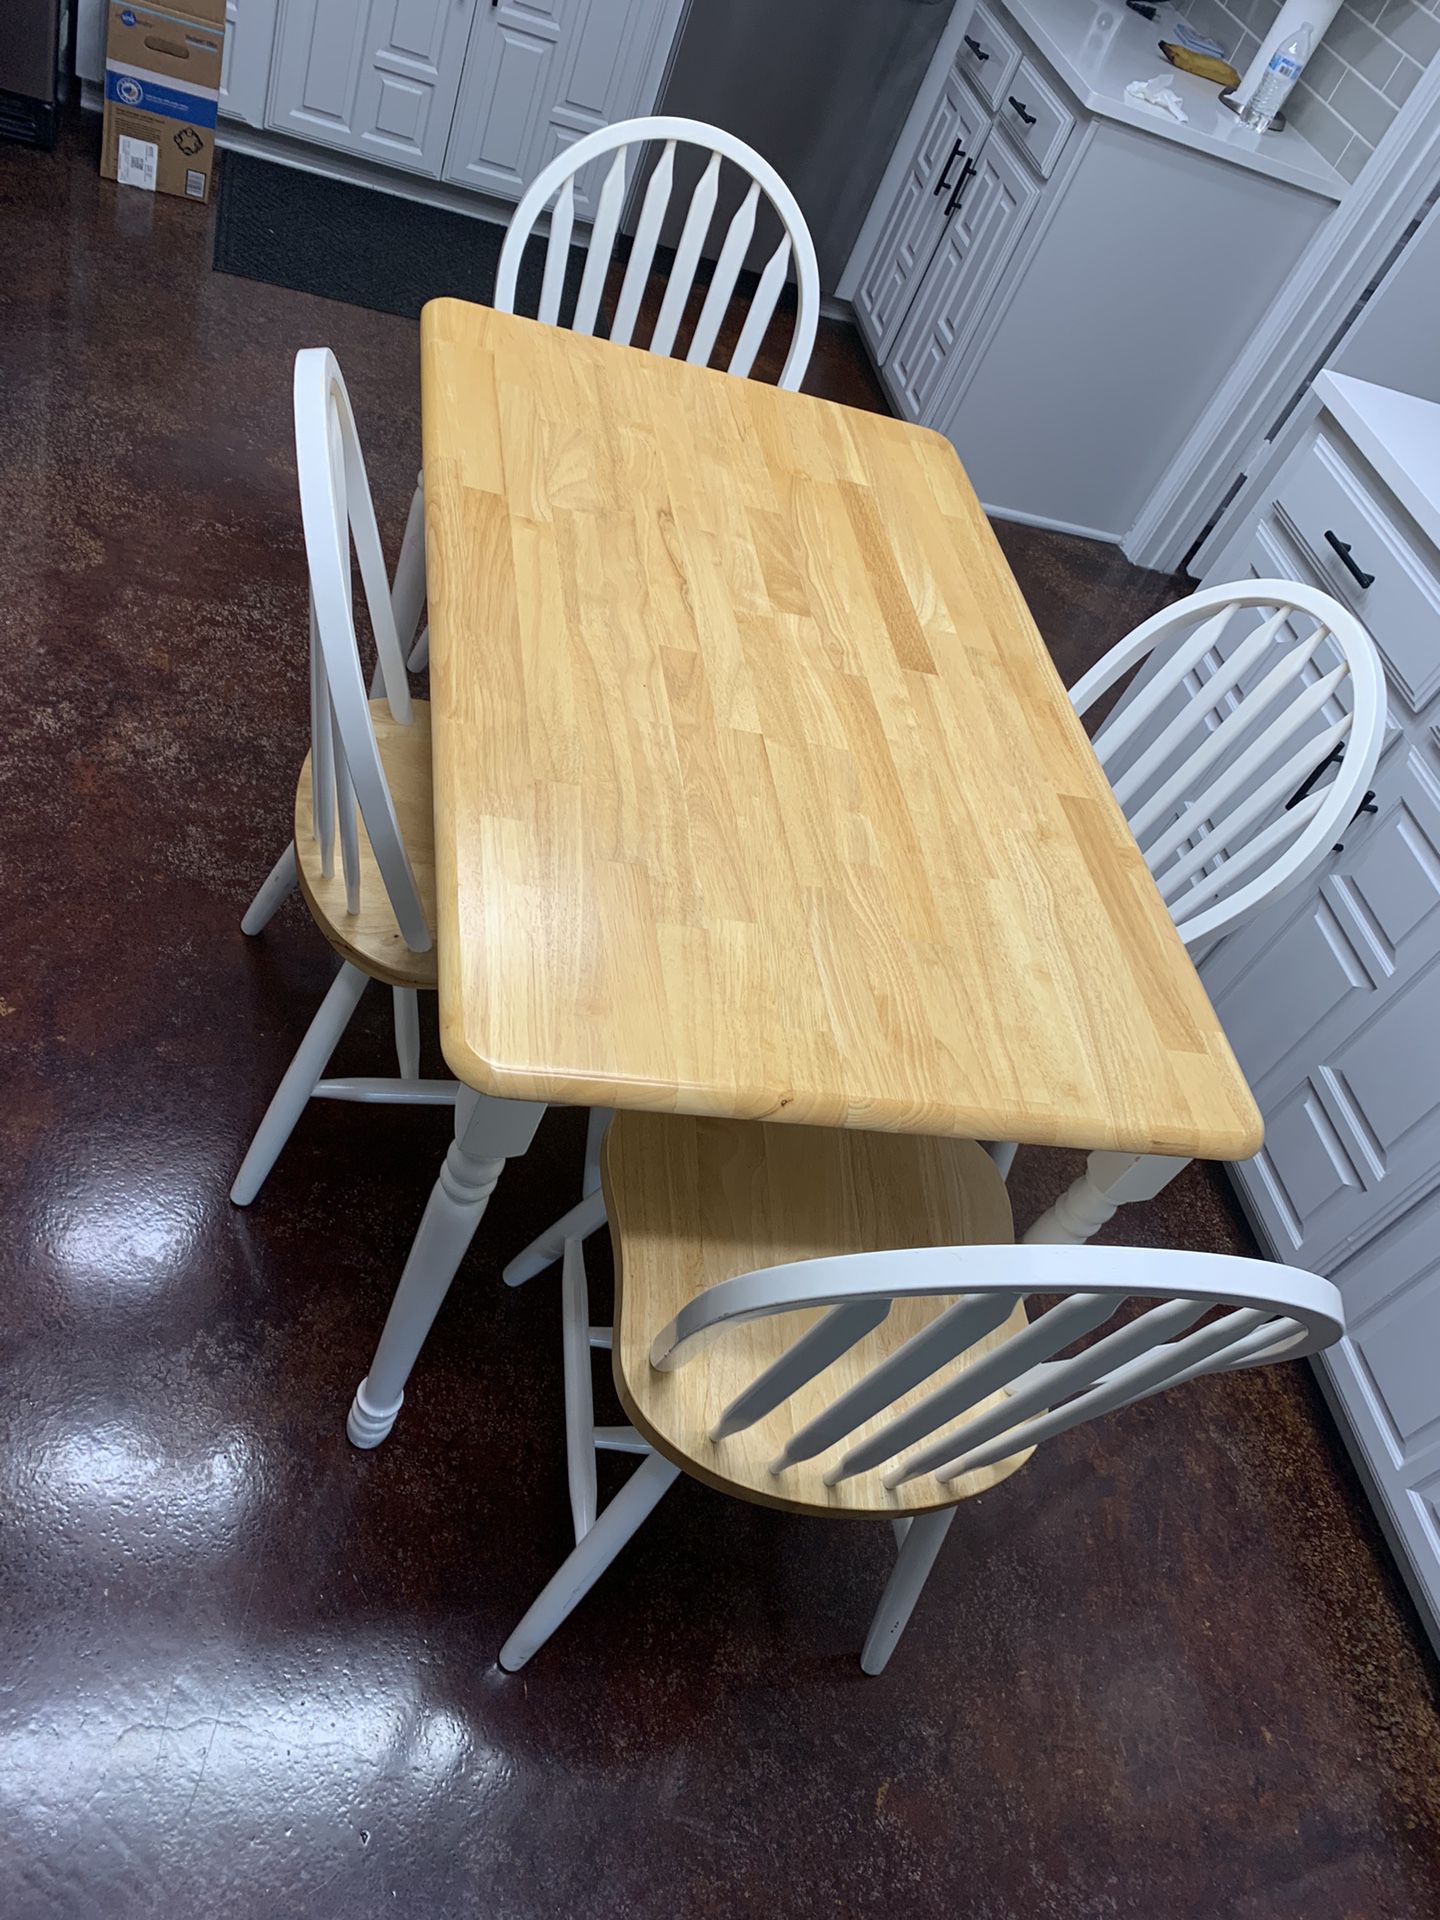 4 Chairs and Dining Table Great Condition